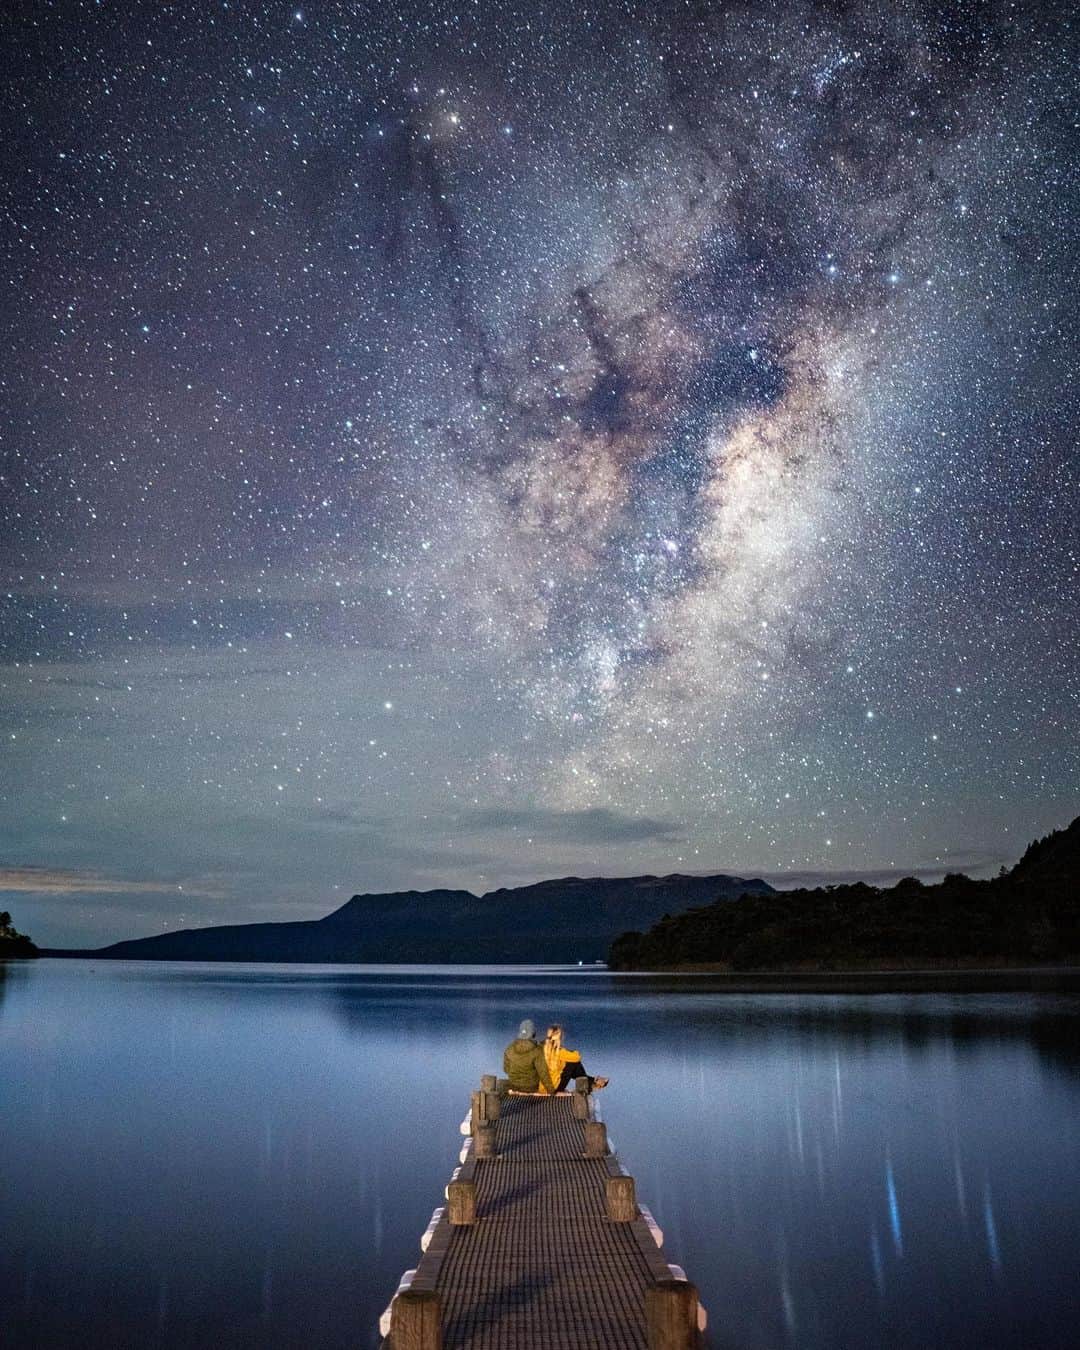 Travis Burkeのインスタグラム：「Summer turned to Autumn, and now it’s Winter. ⠀ Our 3 weeks in New Zealand has quickly become 4 months. Cold and rainy days occasionally give way to crisp clear nights where the milky way galaxy shines brighter than I’ve ever seen in my life, and I’m still getting used to seeing the constellations and our galaxy upside down 🙃🌌. ⠀ We are still figuring out what we should do (go home or stay here forever), but for now, we are just trying to take everything one day at a time.  #milkyway #newzealand #vanlife」